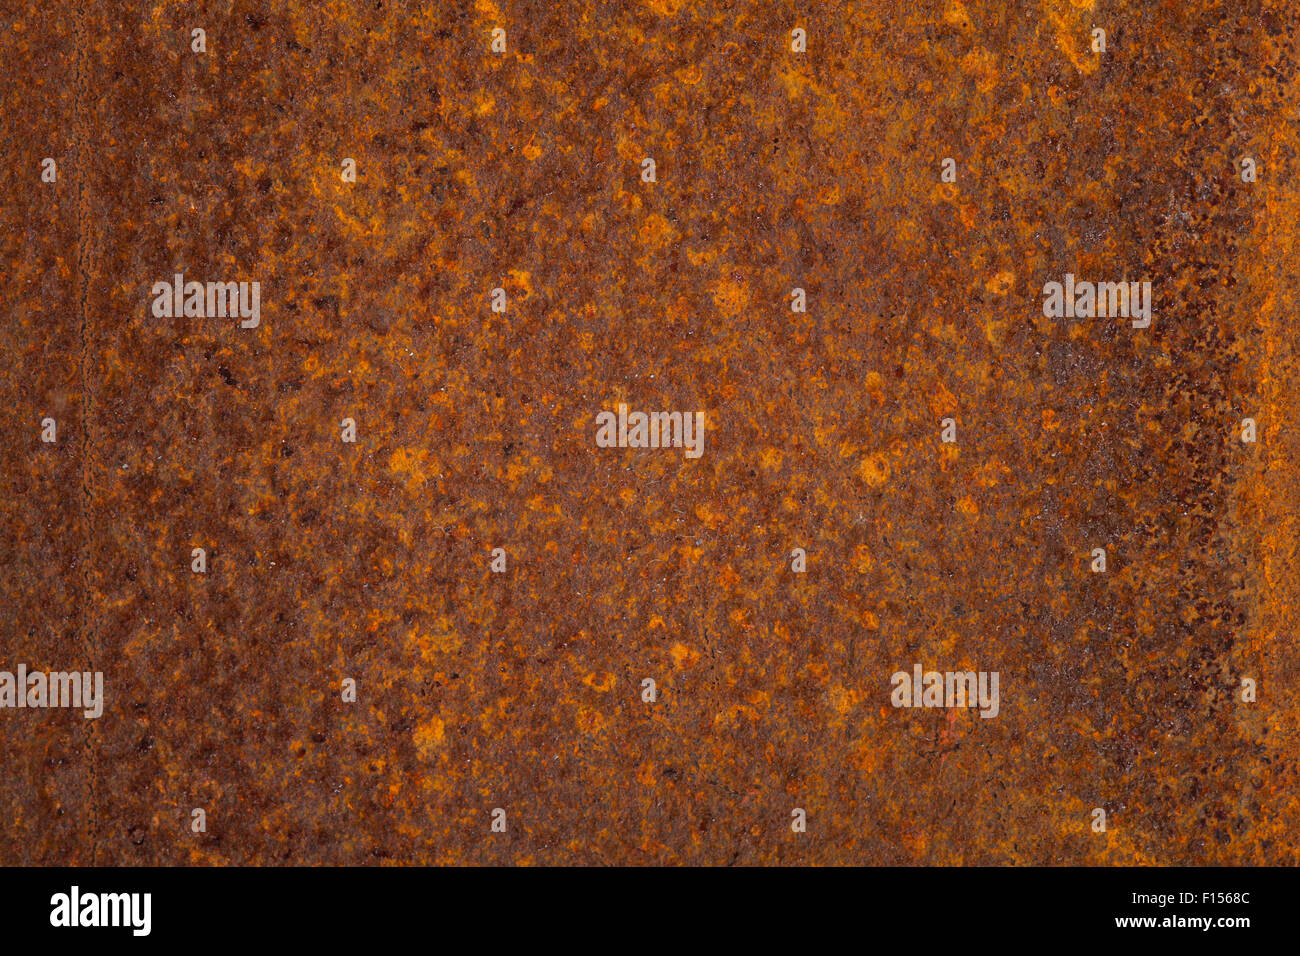 rust background or rusty metal texture Stock Photo